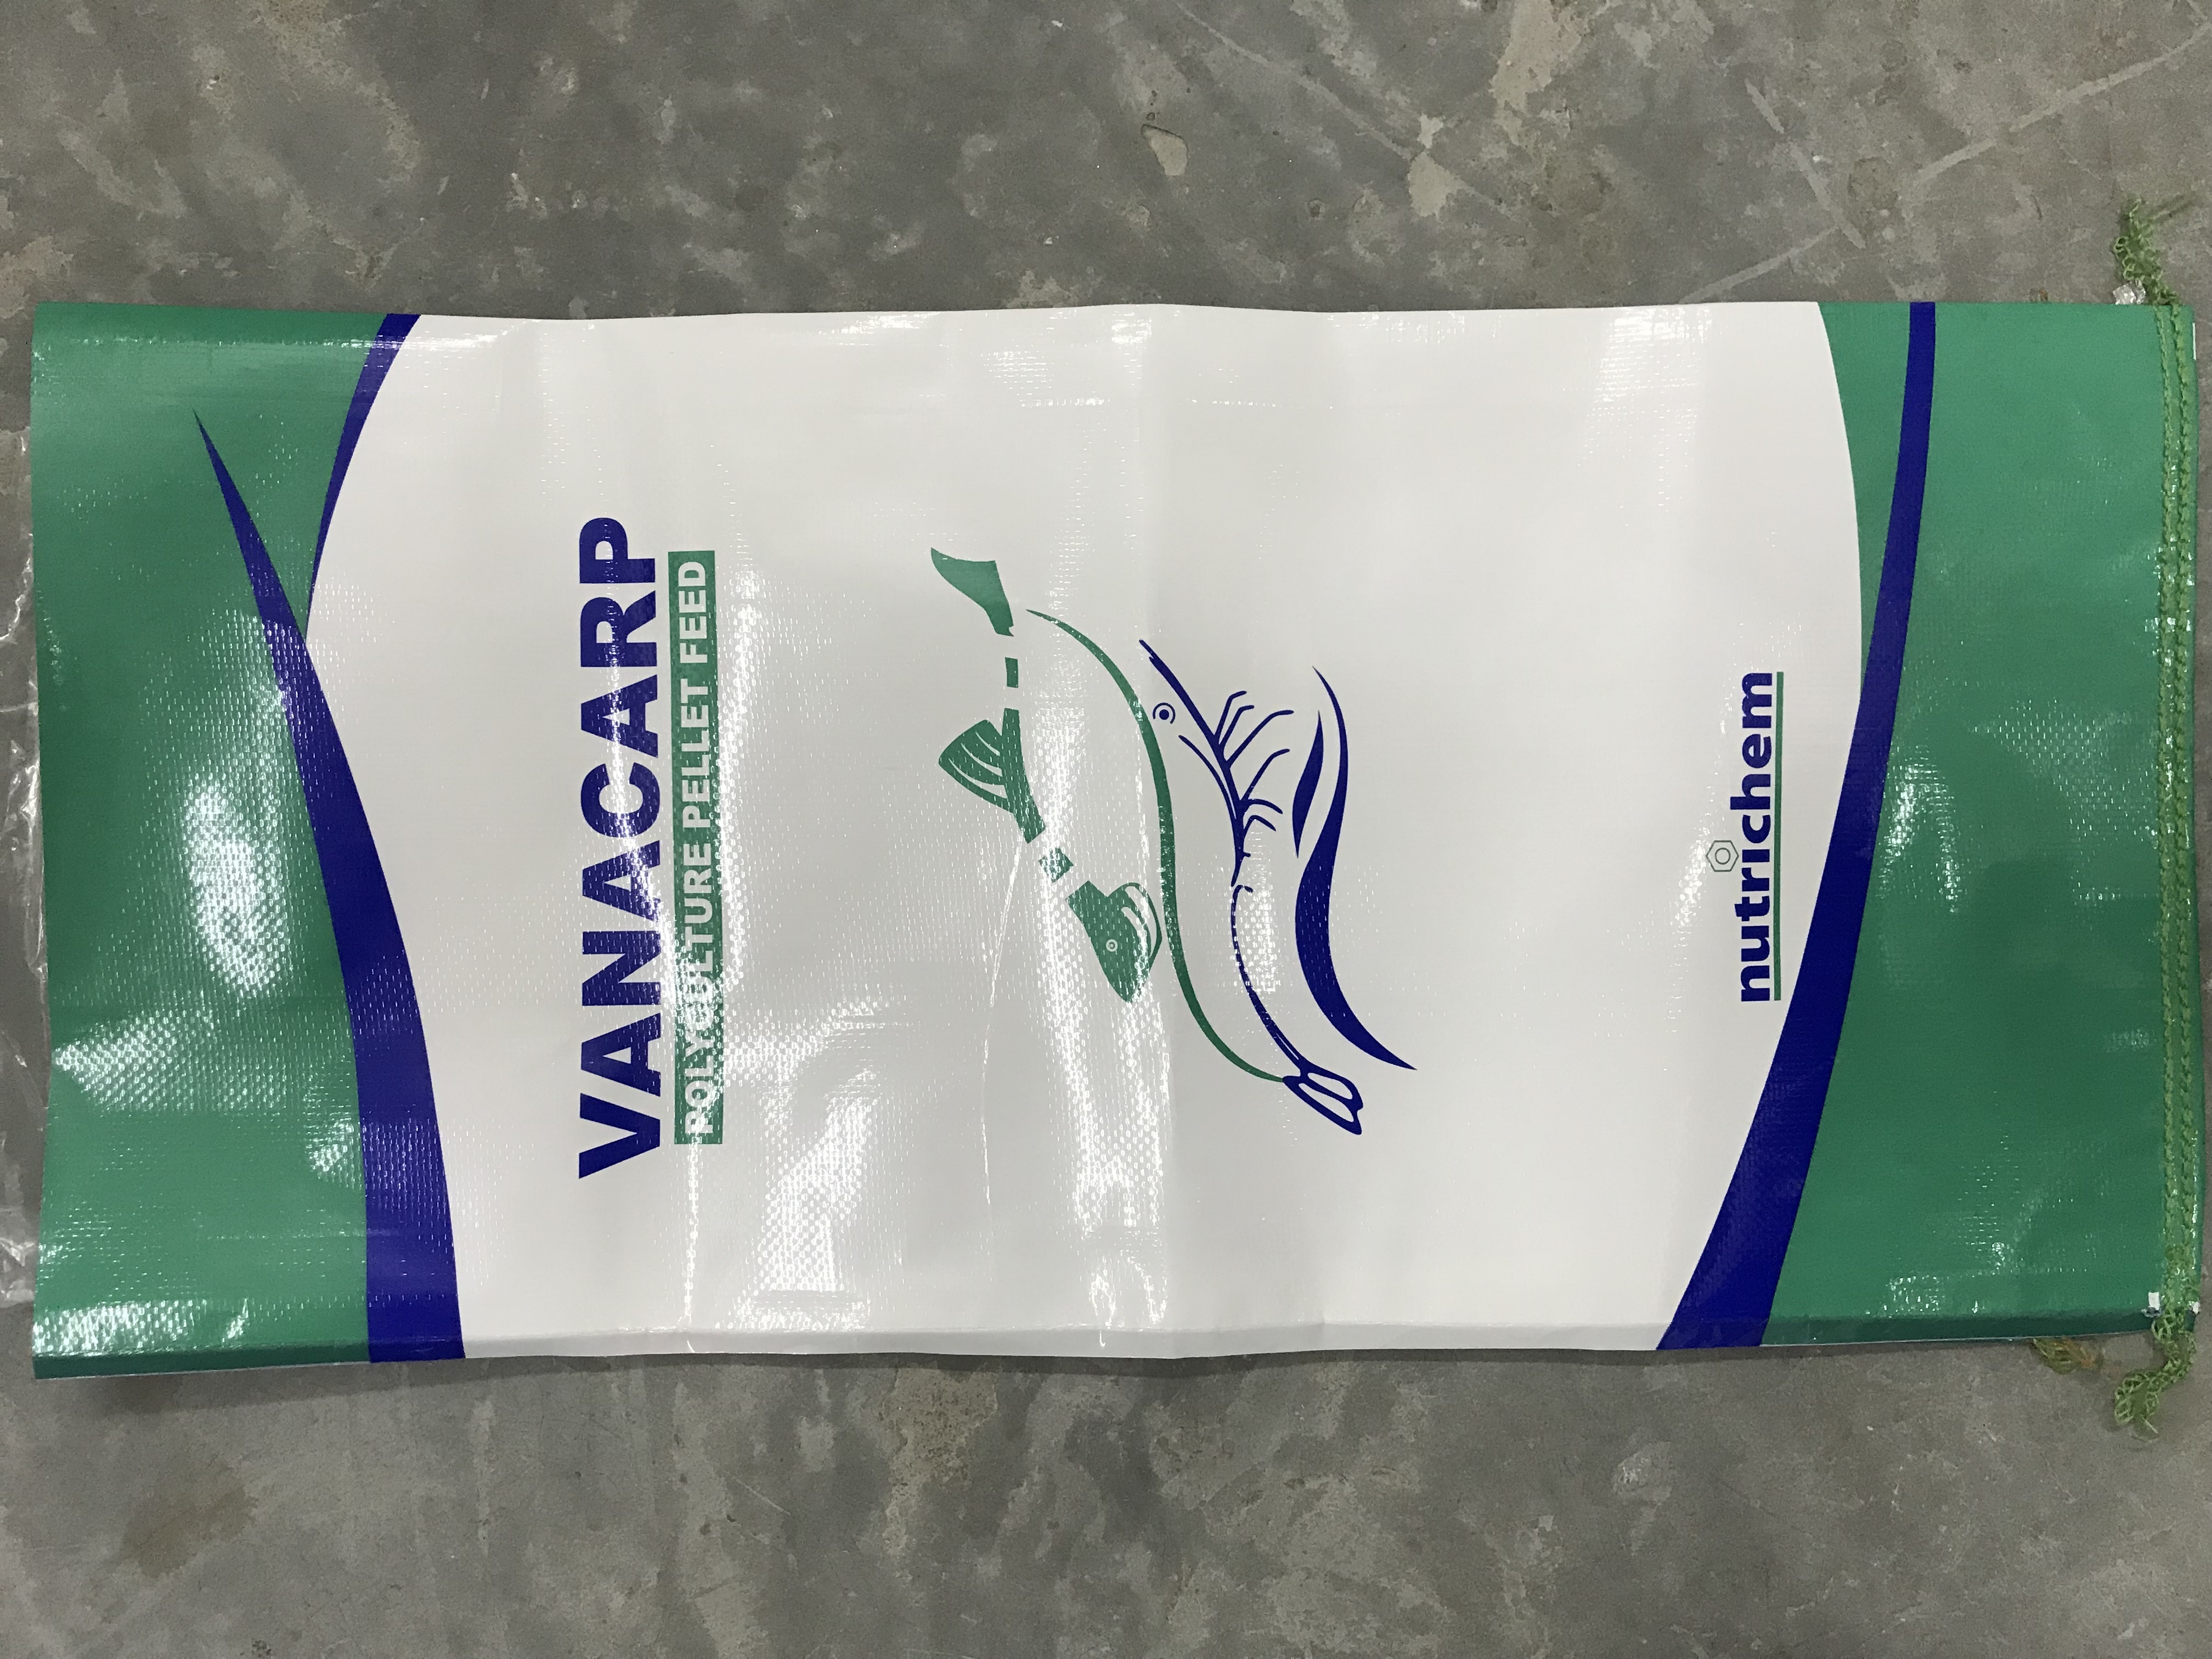 Animal Feed Supplement Bags